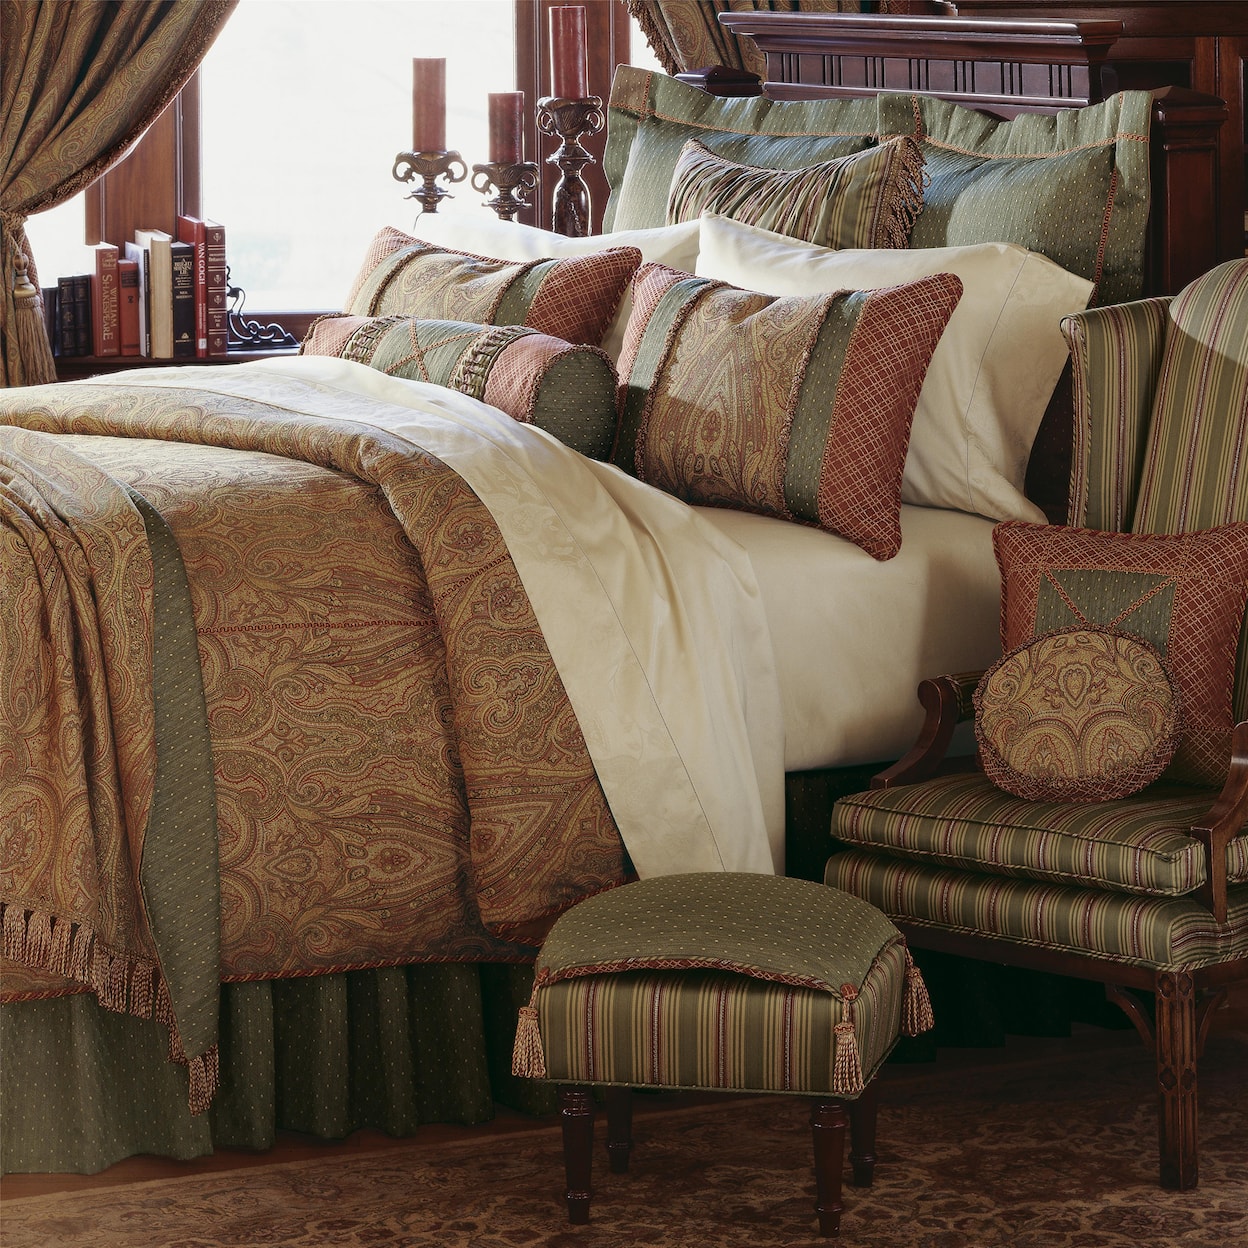 Eastern Accents Glenwood Twin Bedset